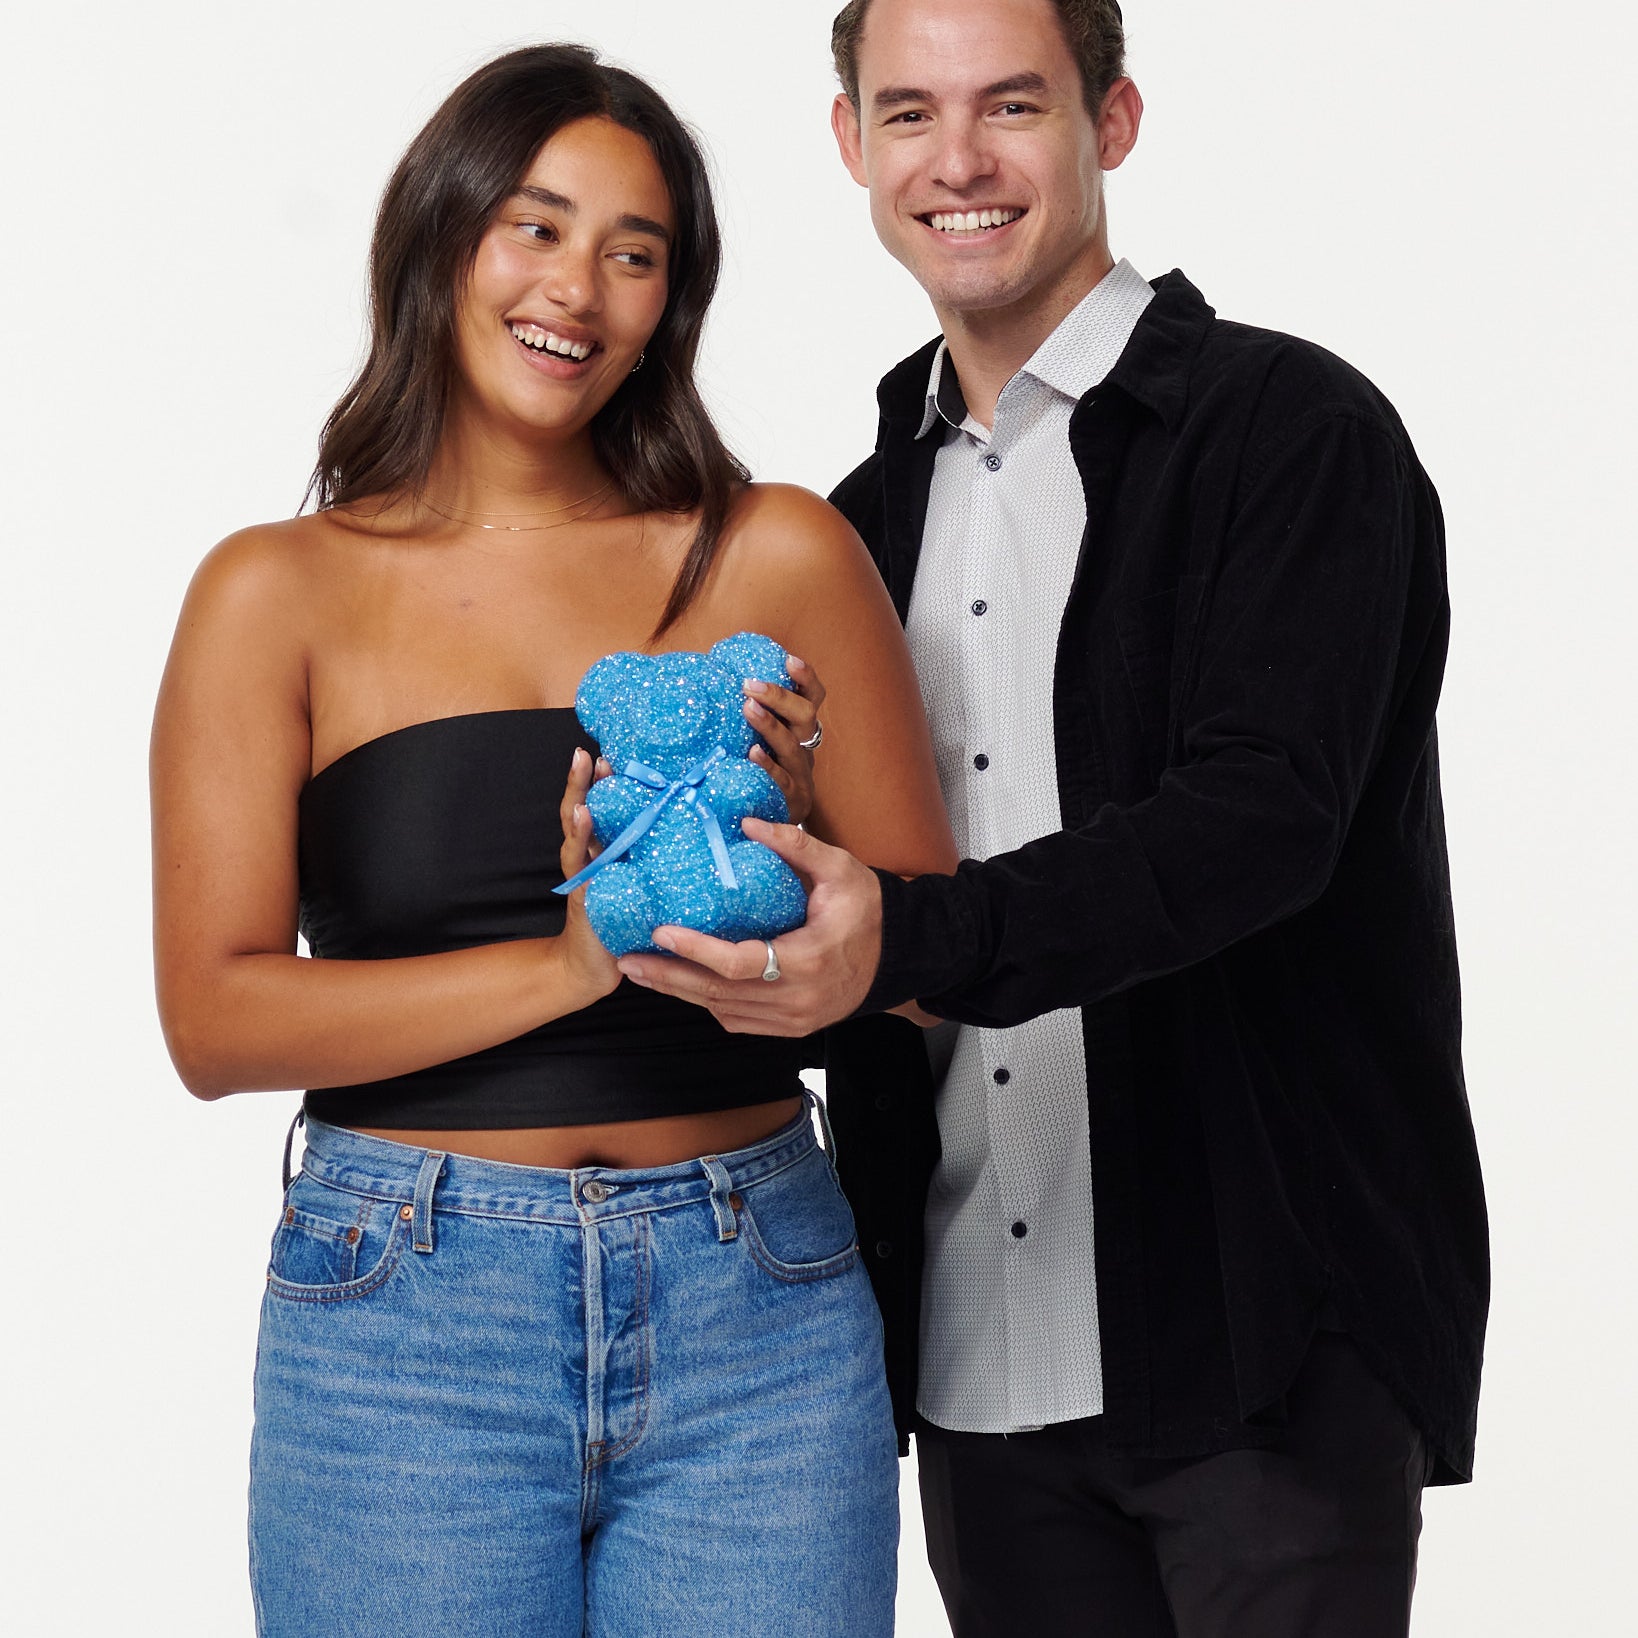 A woman in a black cropped top and blue jeans cradles a blue, sparkly teddy bear with a gentle smile. Next to her, a man in a black jacket and white shirt shares a warm smile, his hands on the teddy bear, as they both enjoy the moment together.